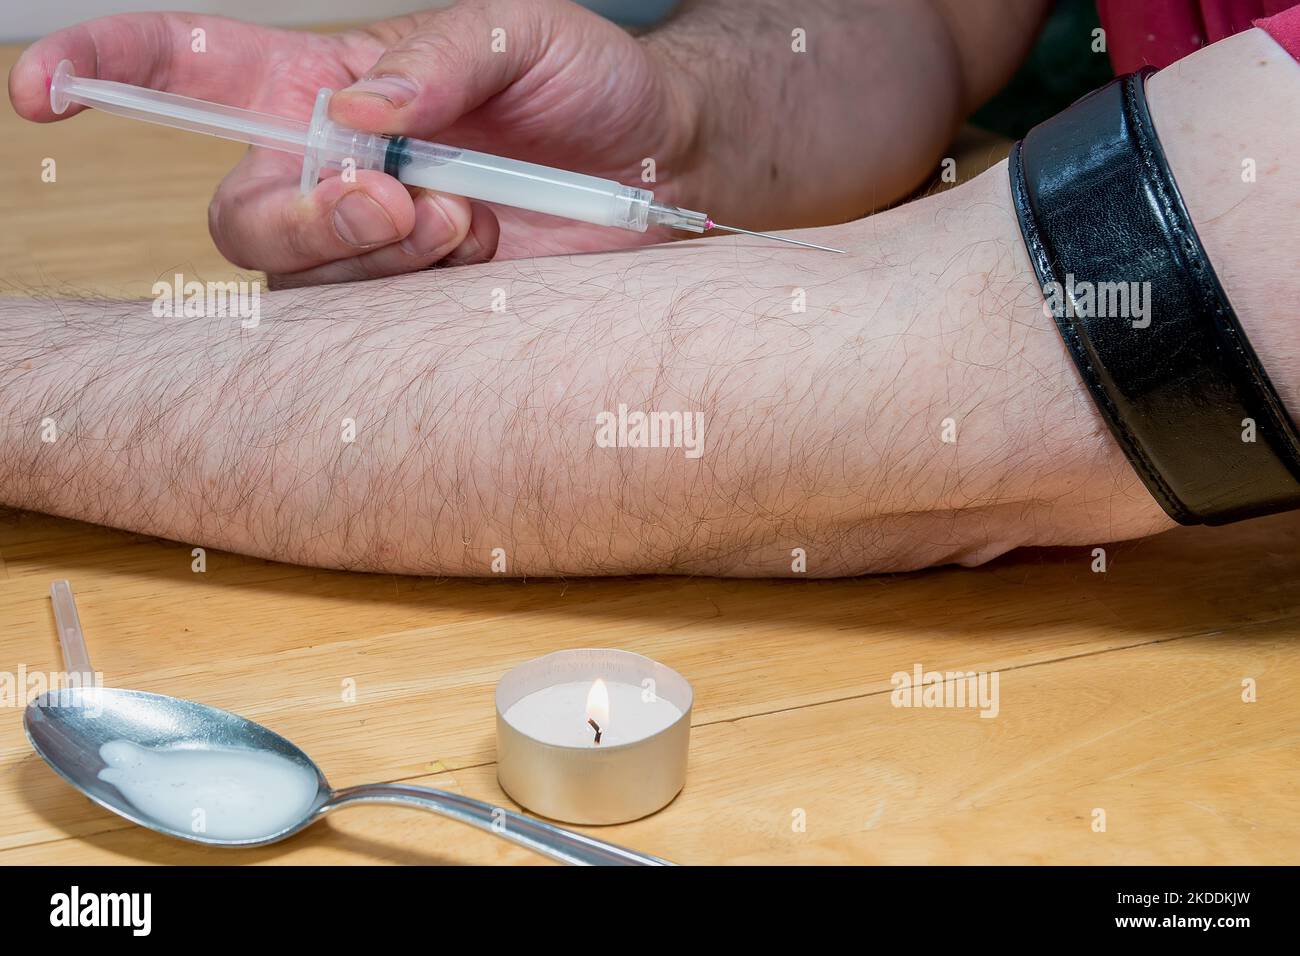 Junkie injecting drugs into his arm. A belt is wrapped around his upper arm. Candle and spoon with partially dissolved drugs in foreground. Stock Photo